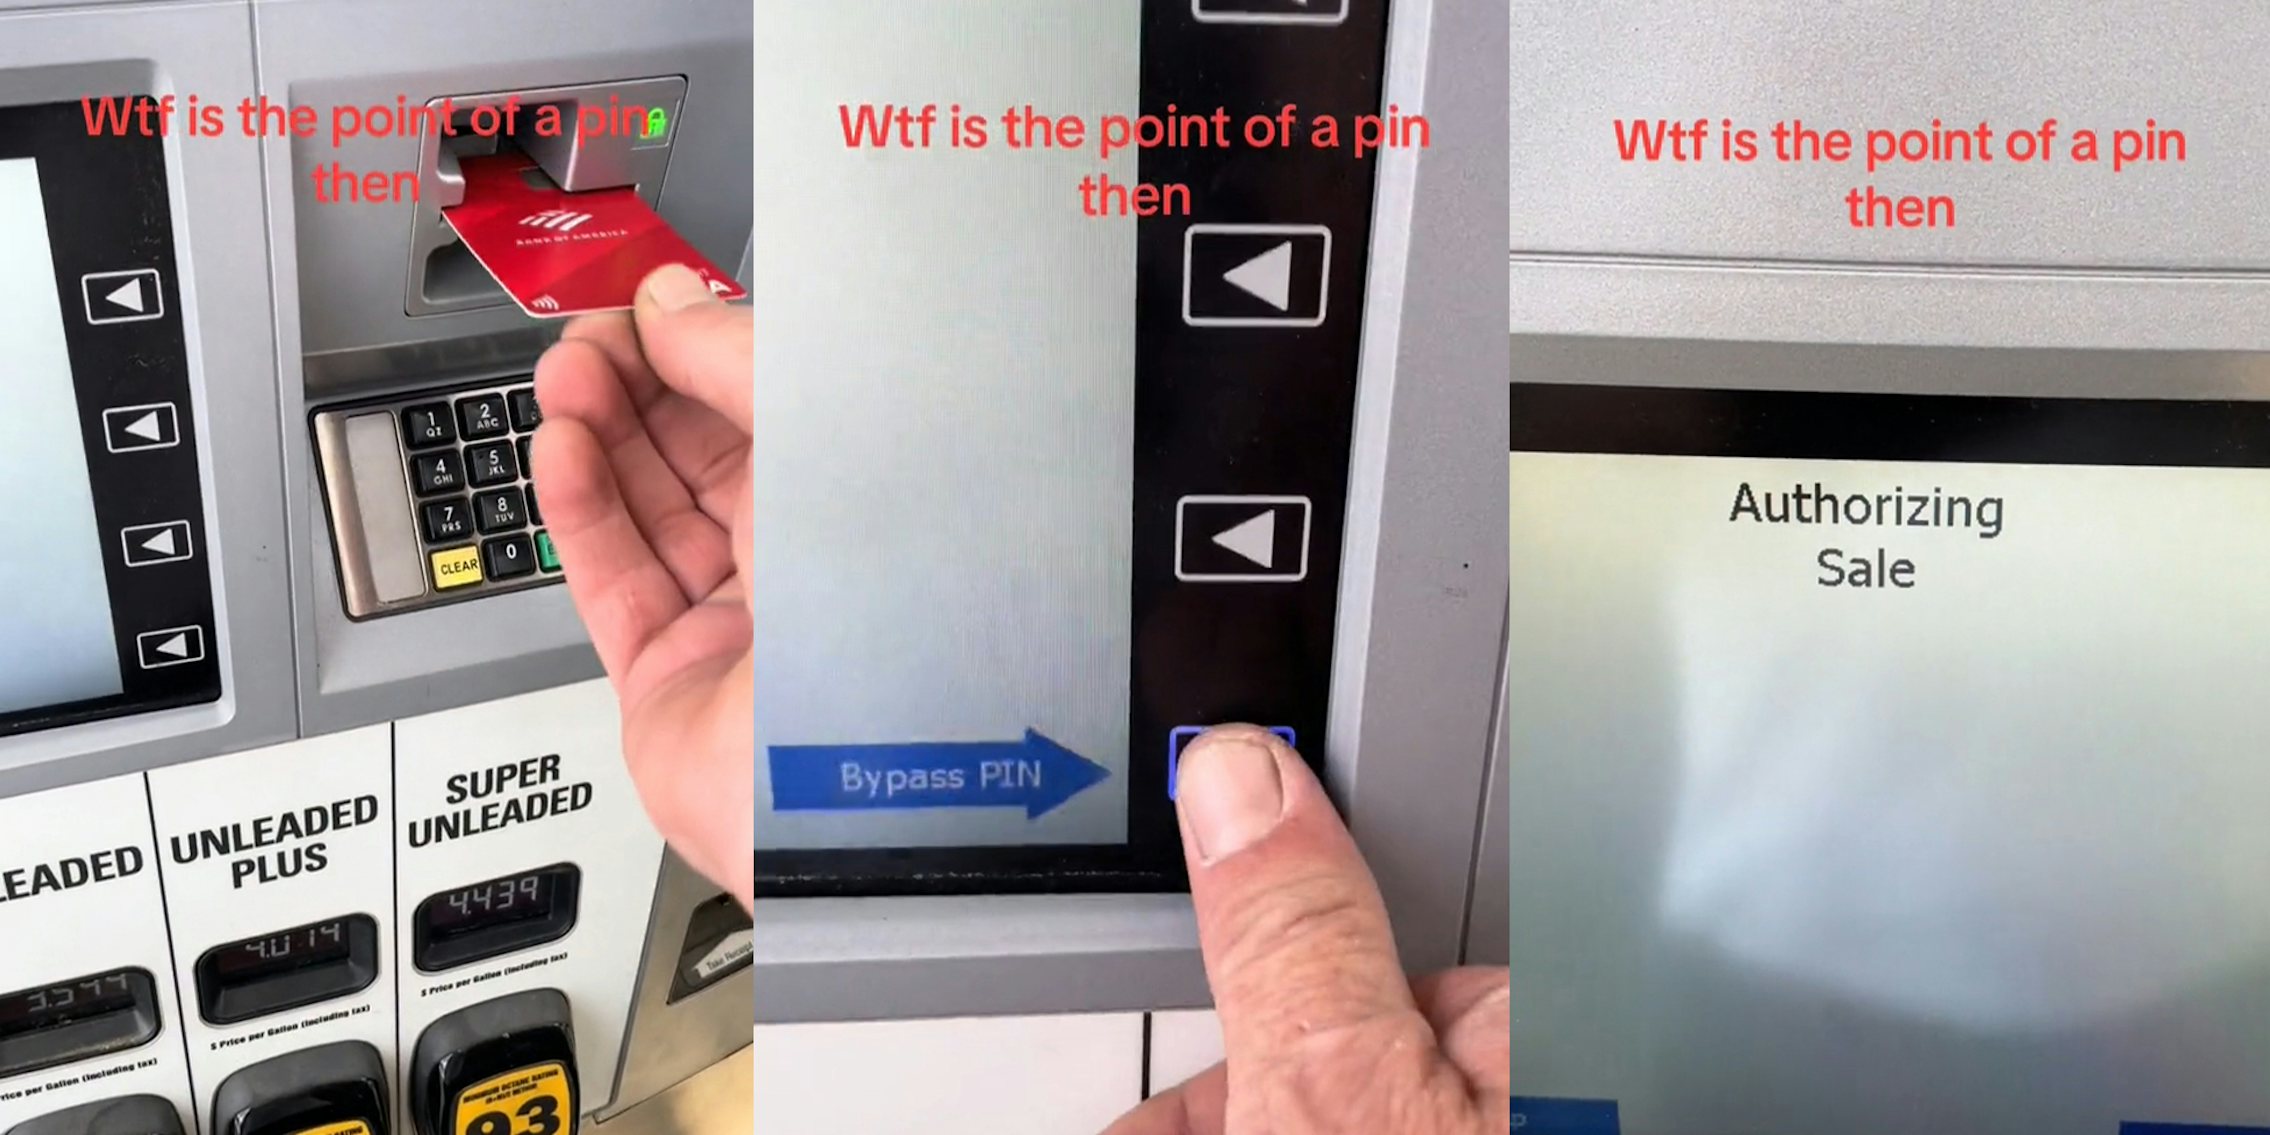 Customer shows fuel pump has a 'bypass pin' option when paying with card